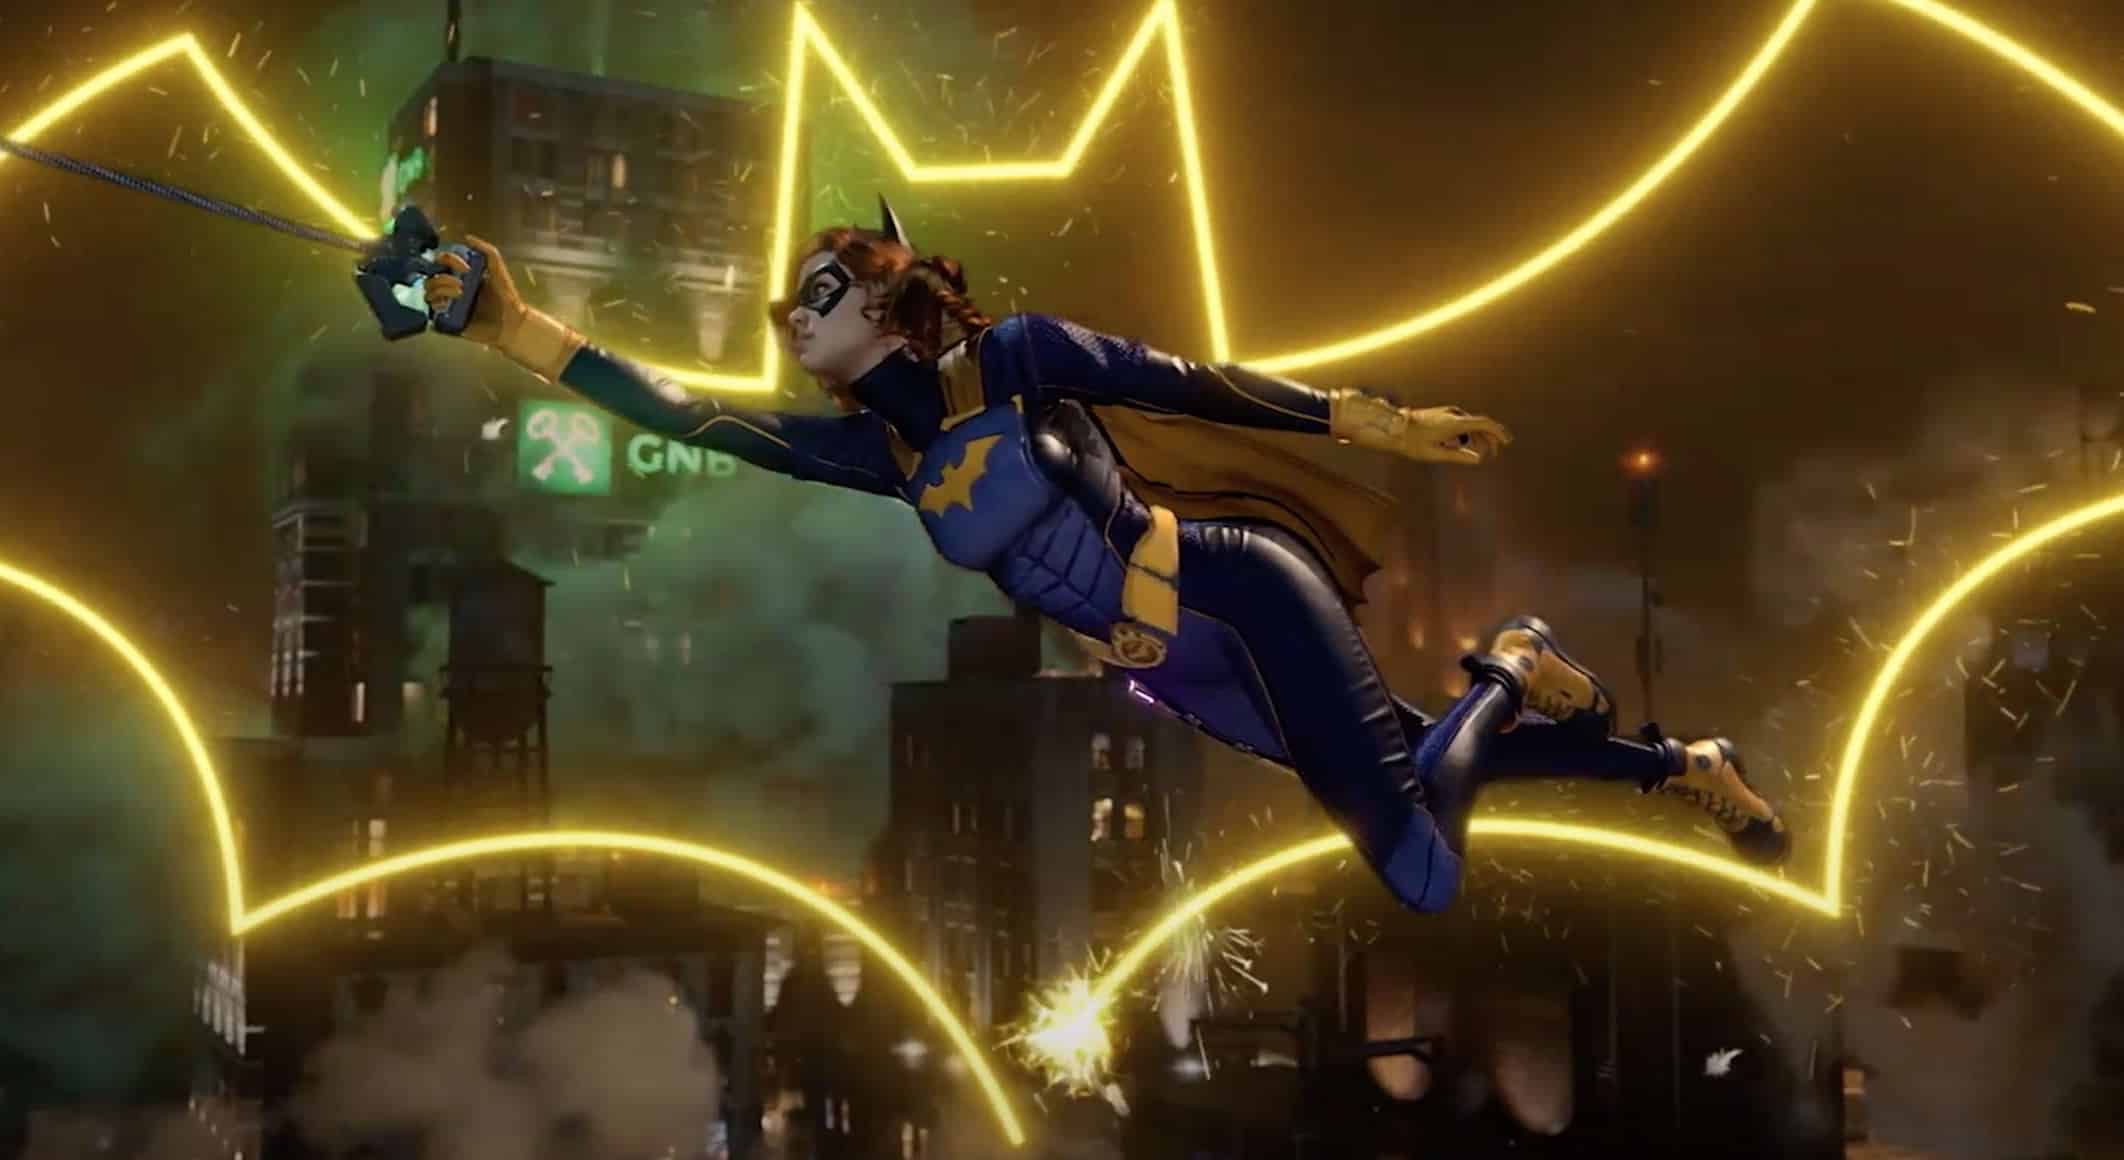 SDCC '22: Batgirl takes center stage in the latest GOTHAM KNIGHTS trailer